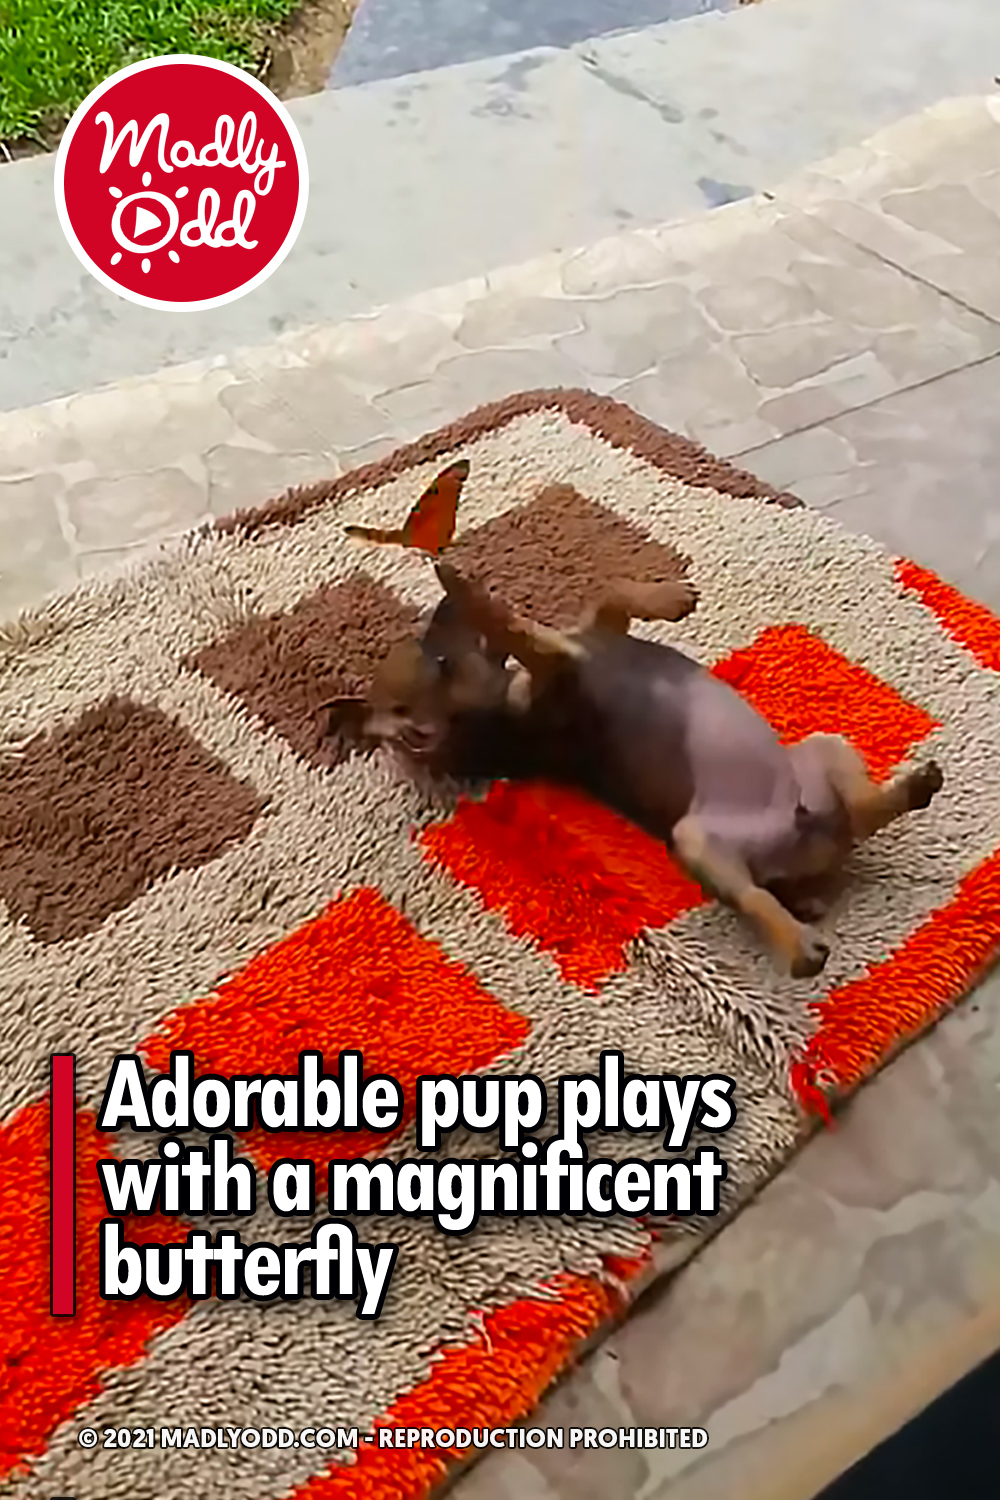 Adorable pup plays with a magnificent butterfly